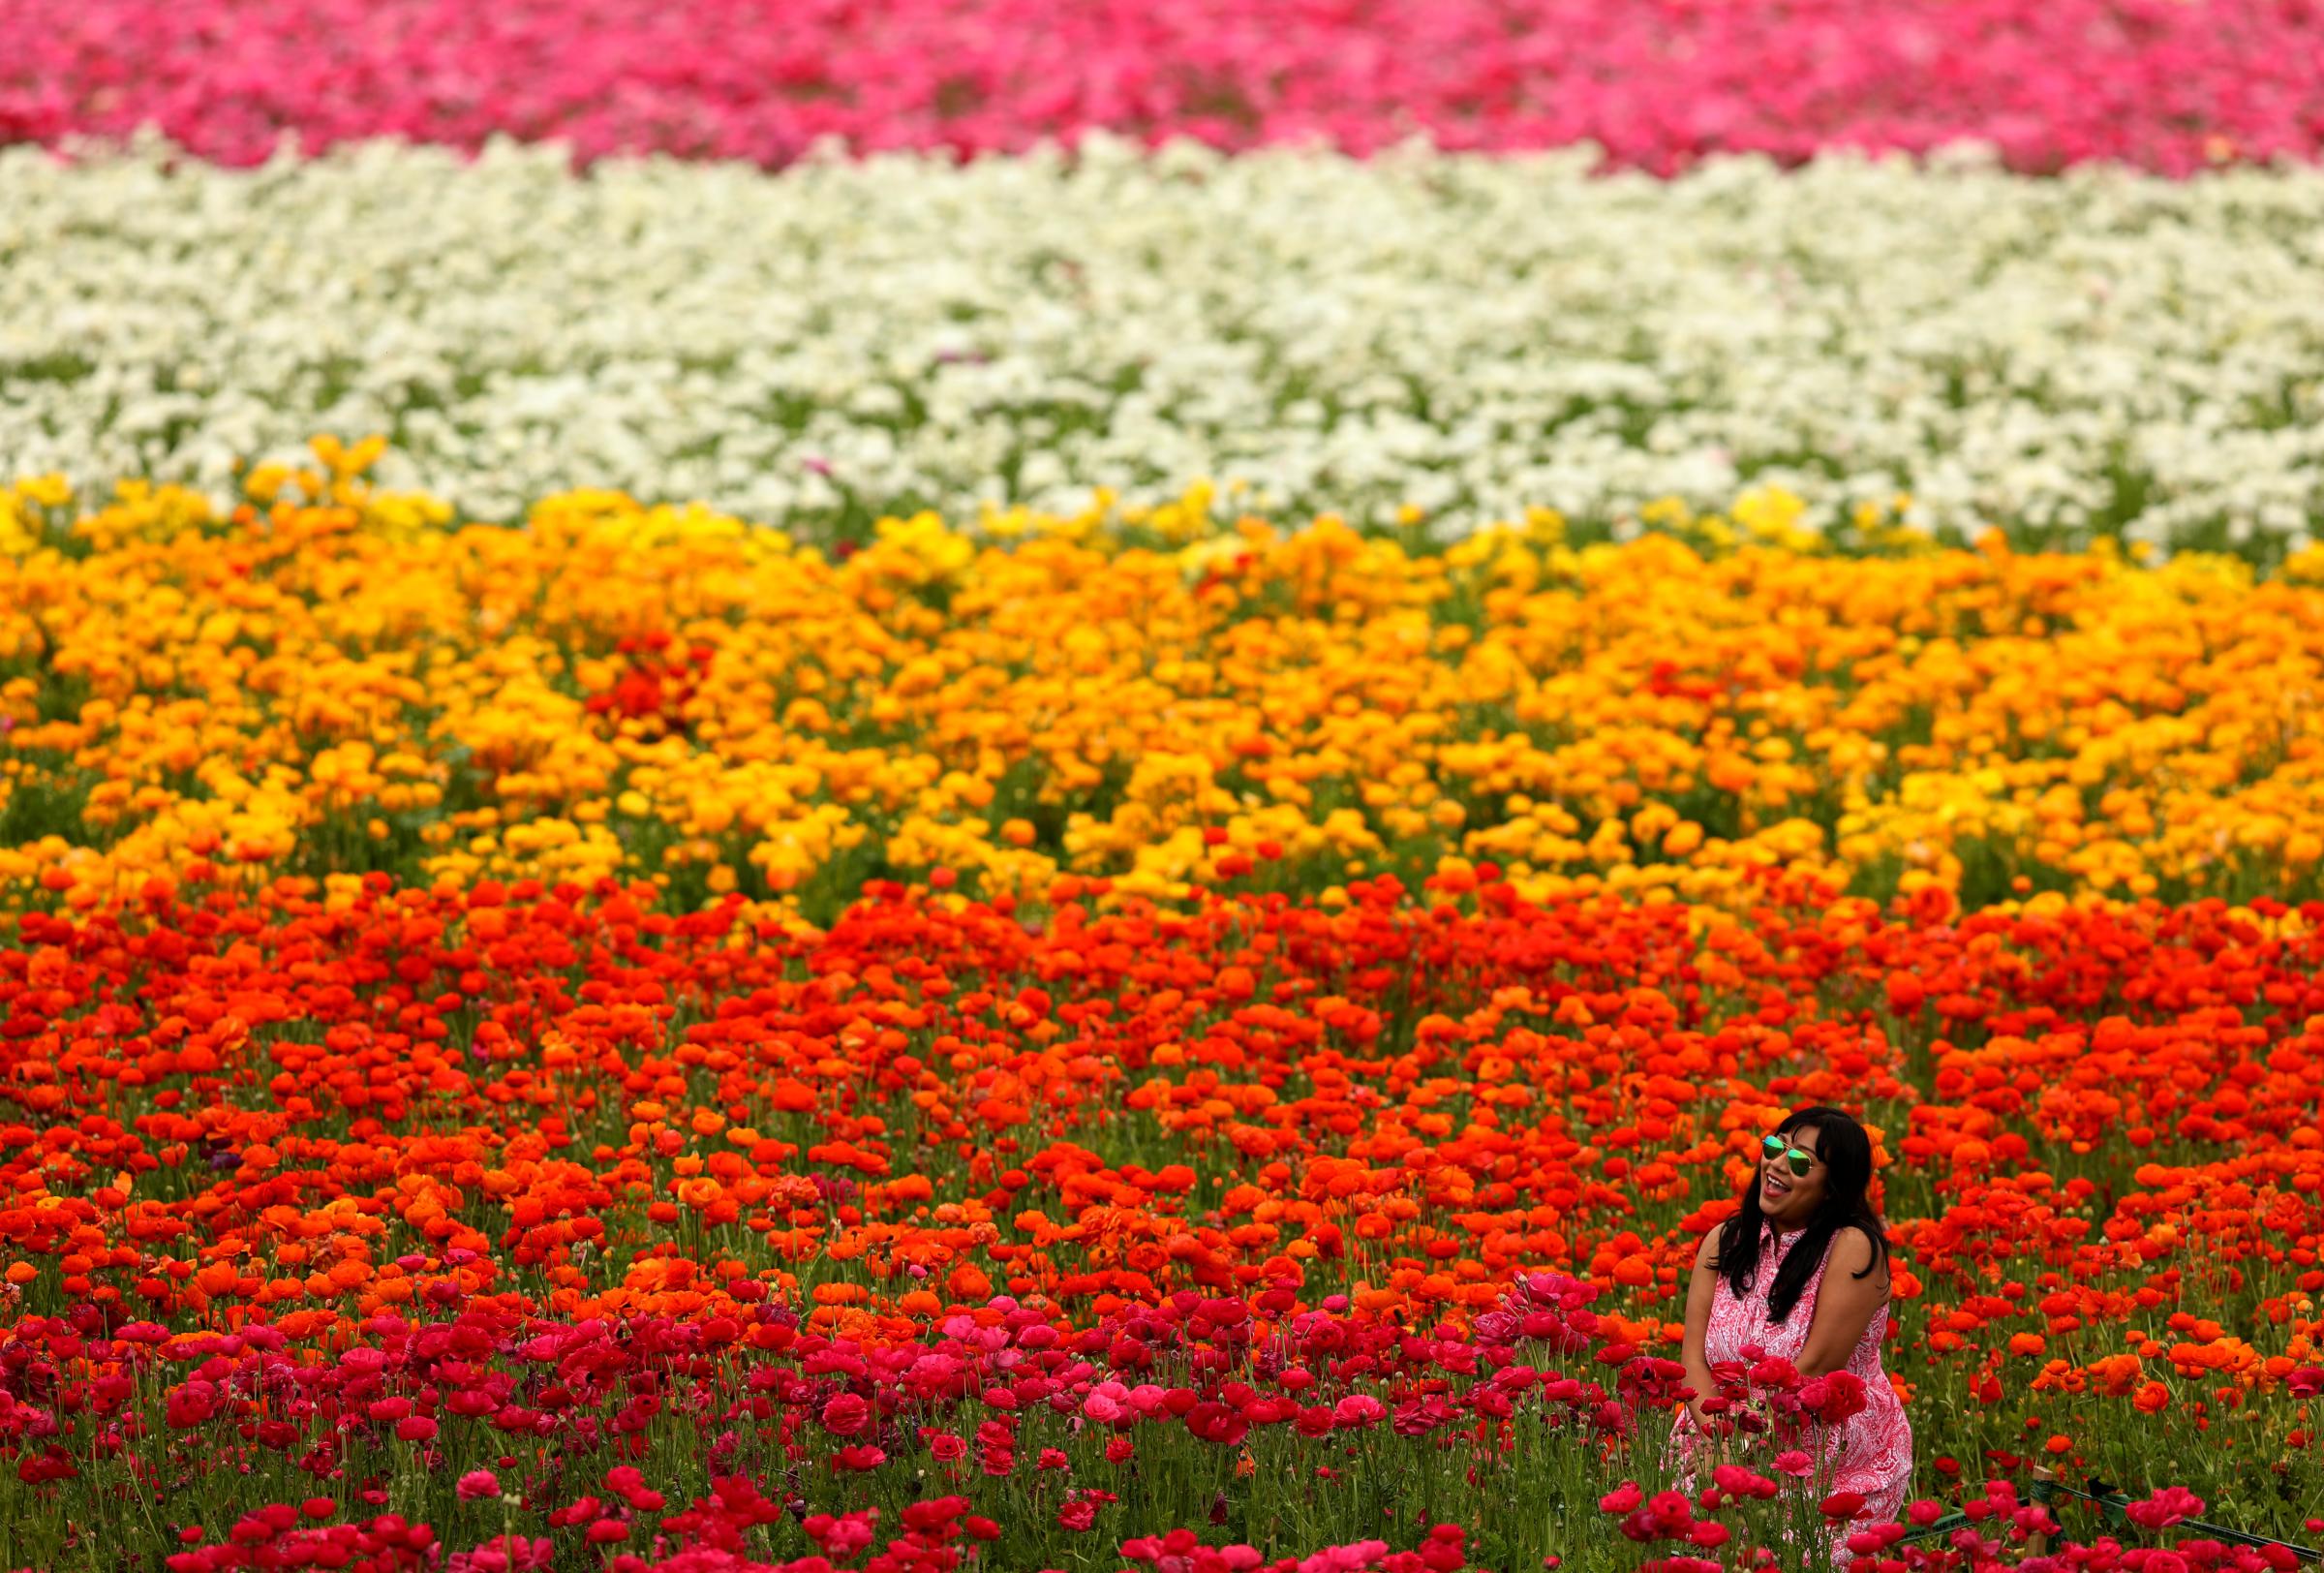 Flower fields on first day of Spring in Carlsbad, California